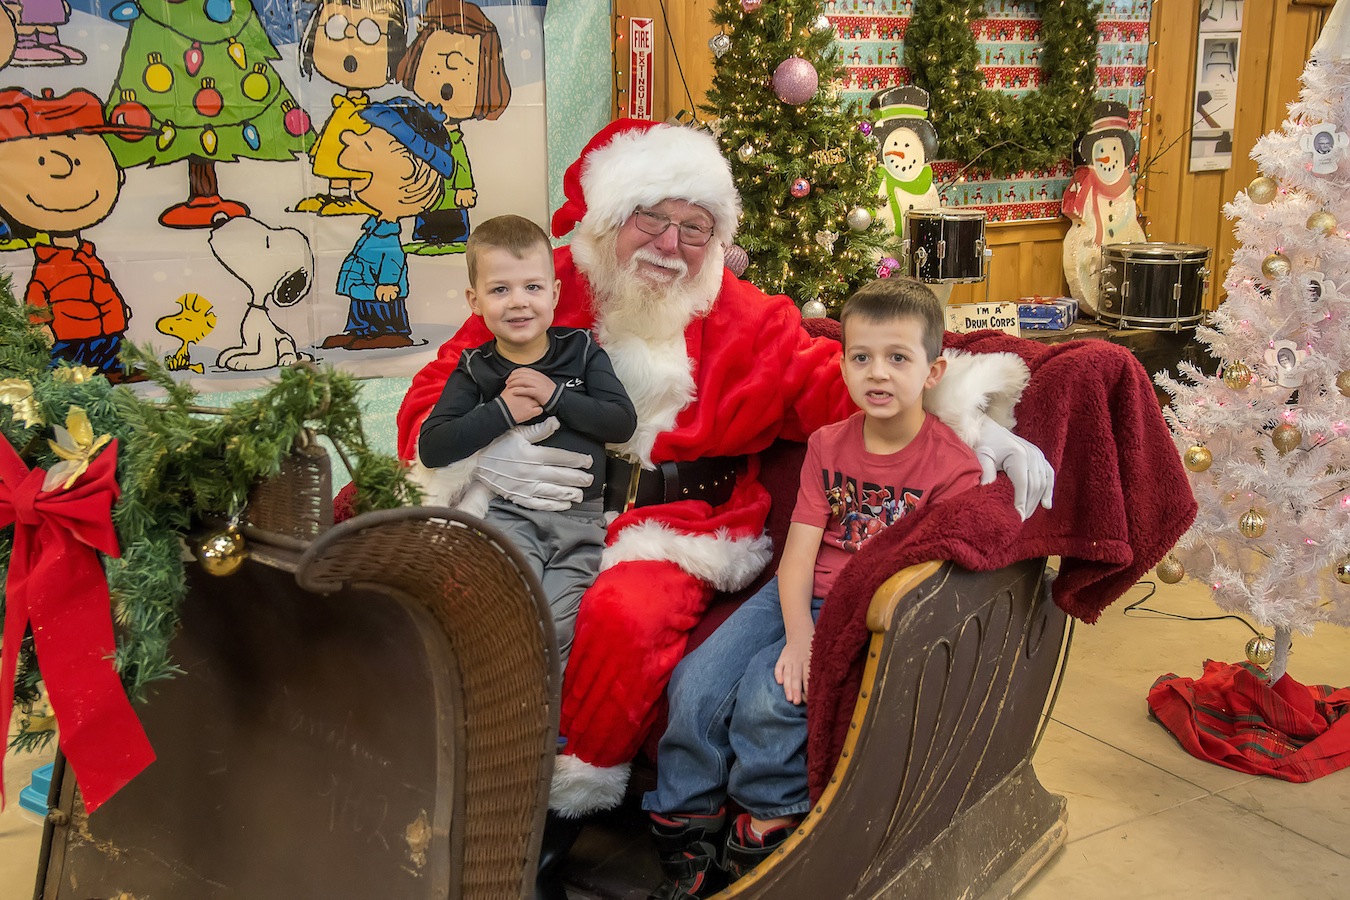 Pictured are scenes from this past weekend's Christmas at the Farm event. (Photos by Wayne Peters) 